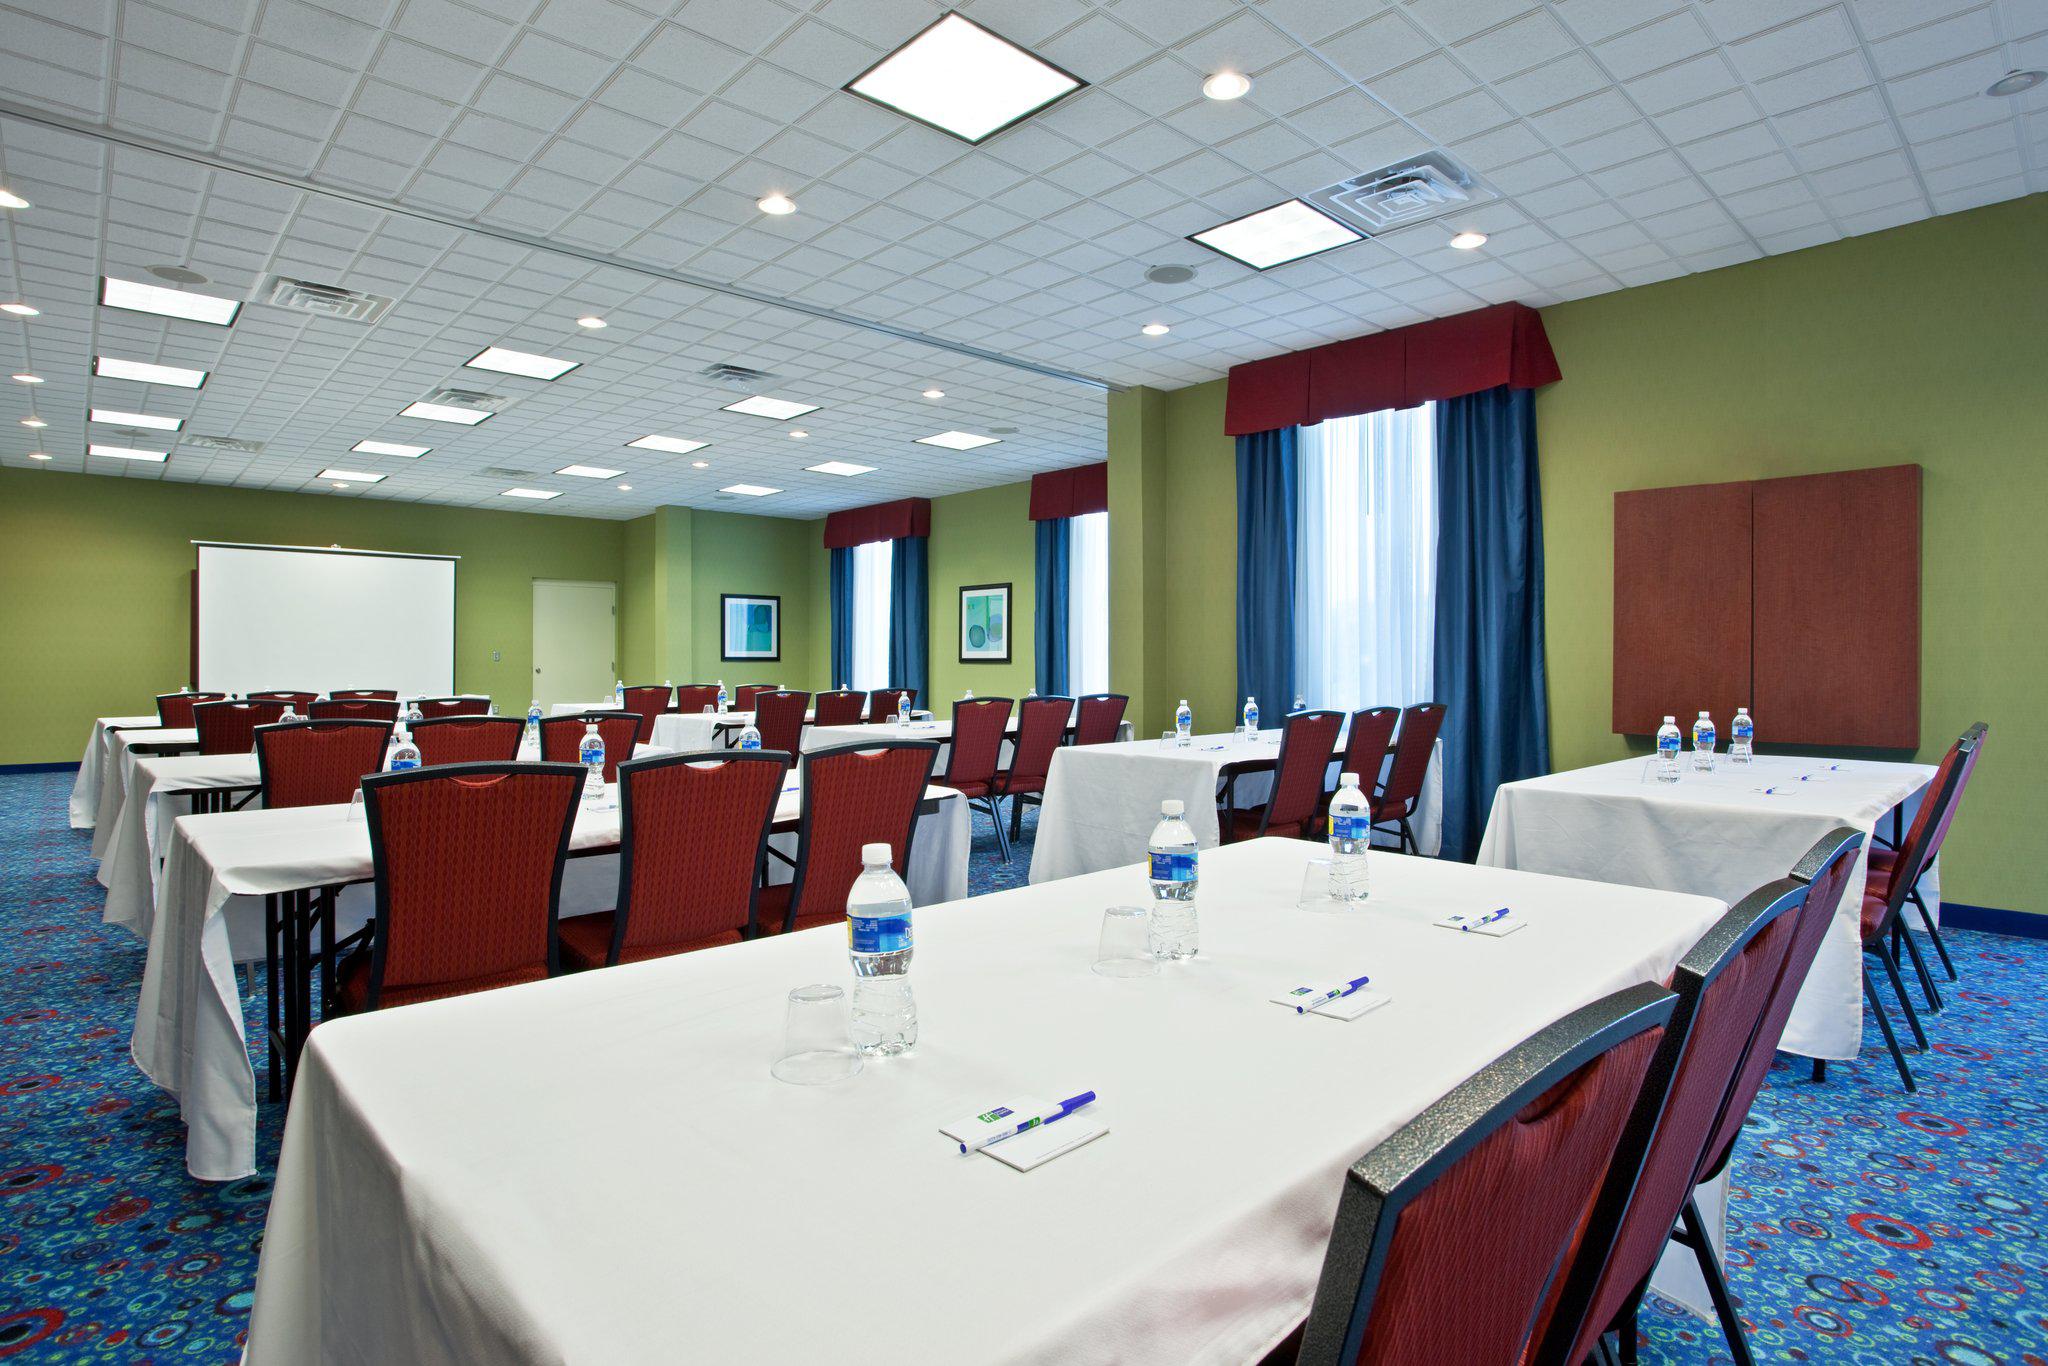 Holiday Inn Express & Suites Akron Regional Airport Area Photo